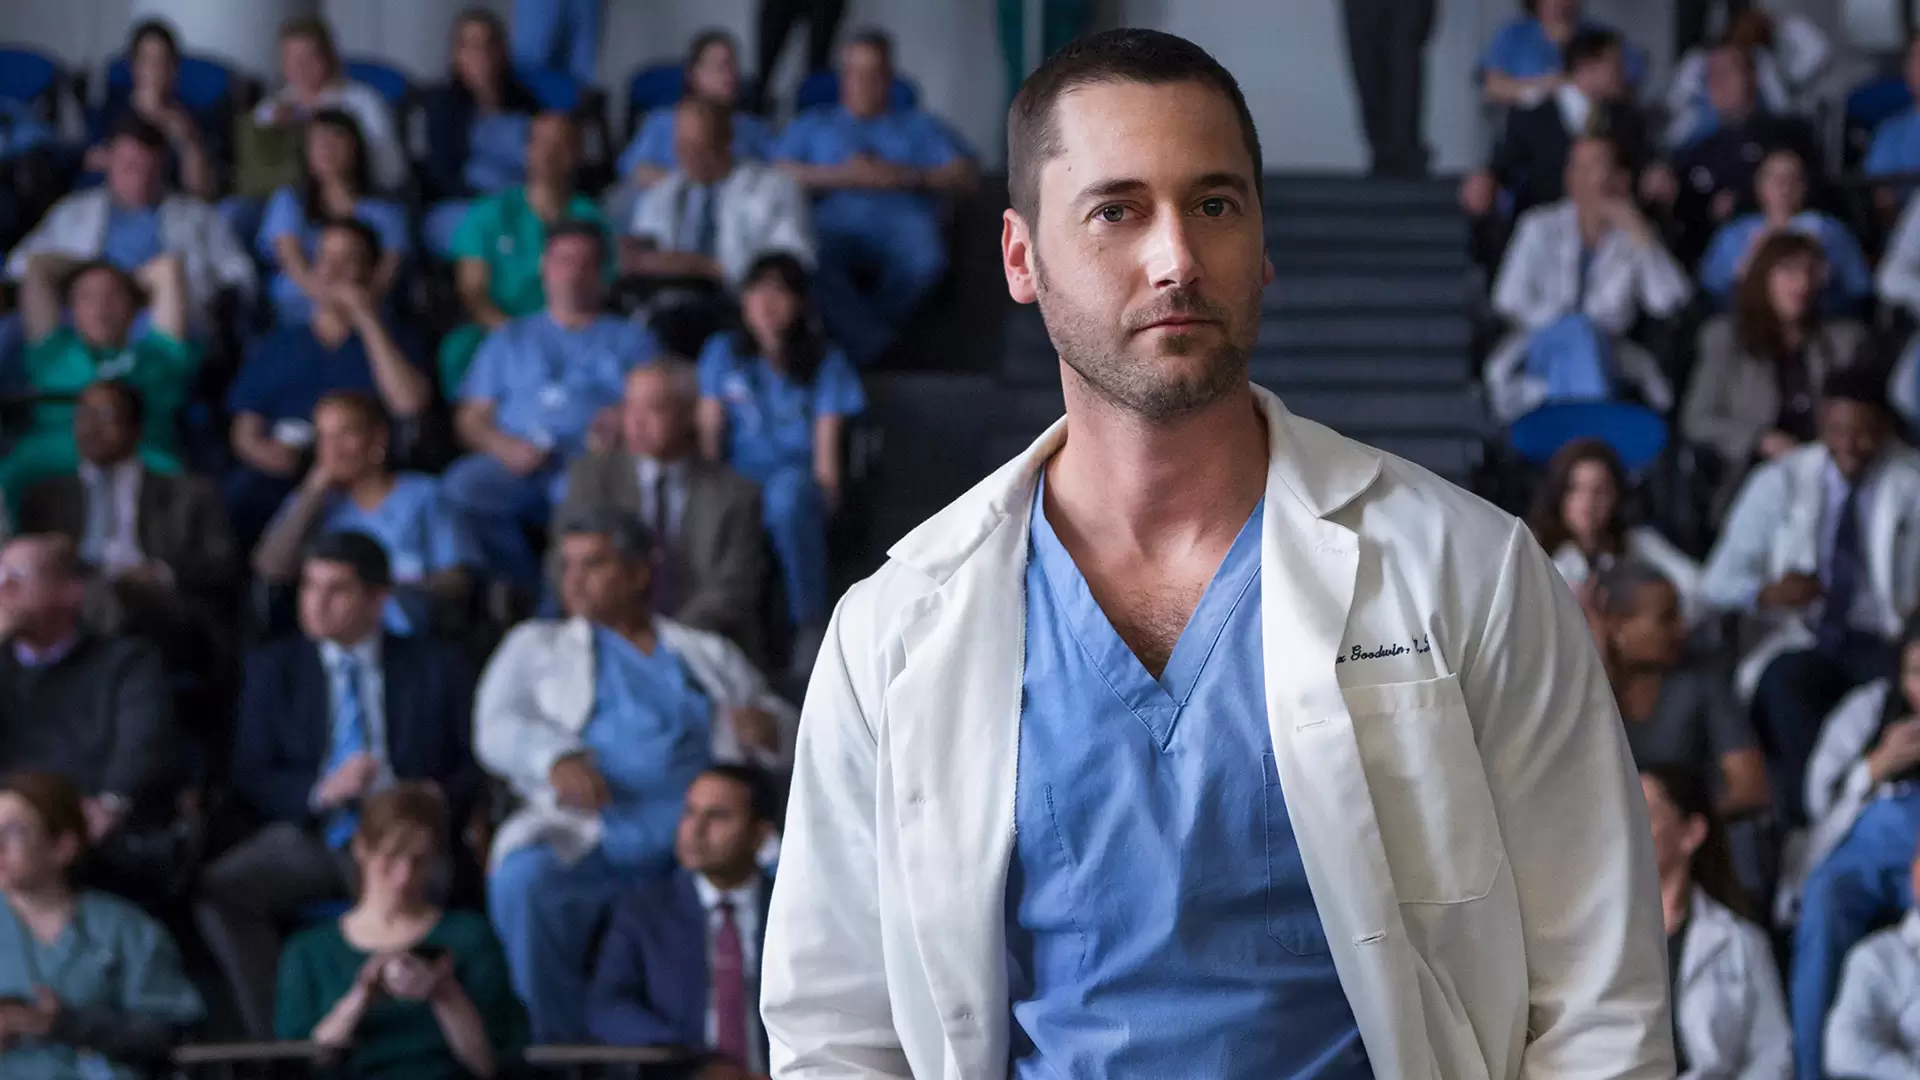 6 leadership lessons from New Amsterdam, the popular TV medical drama